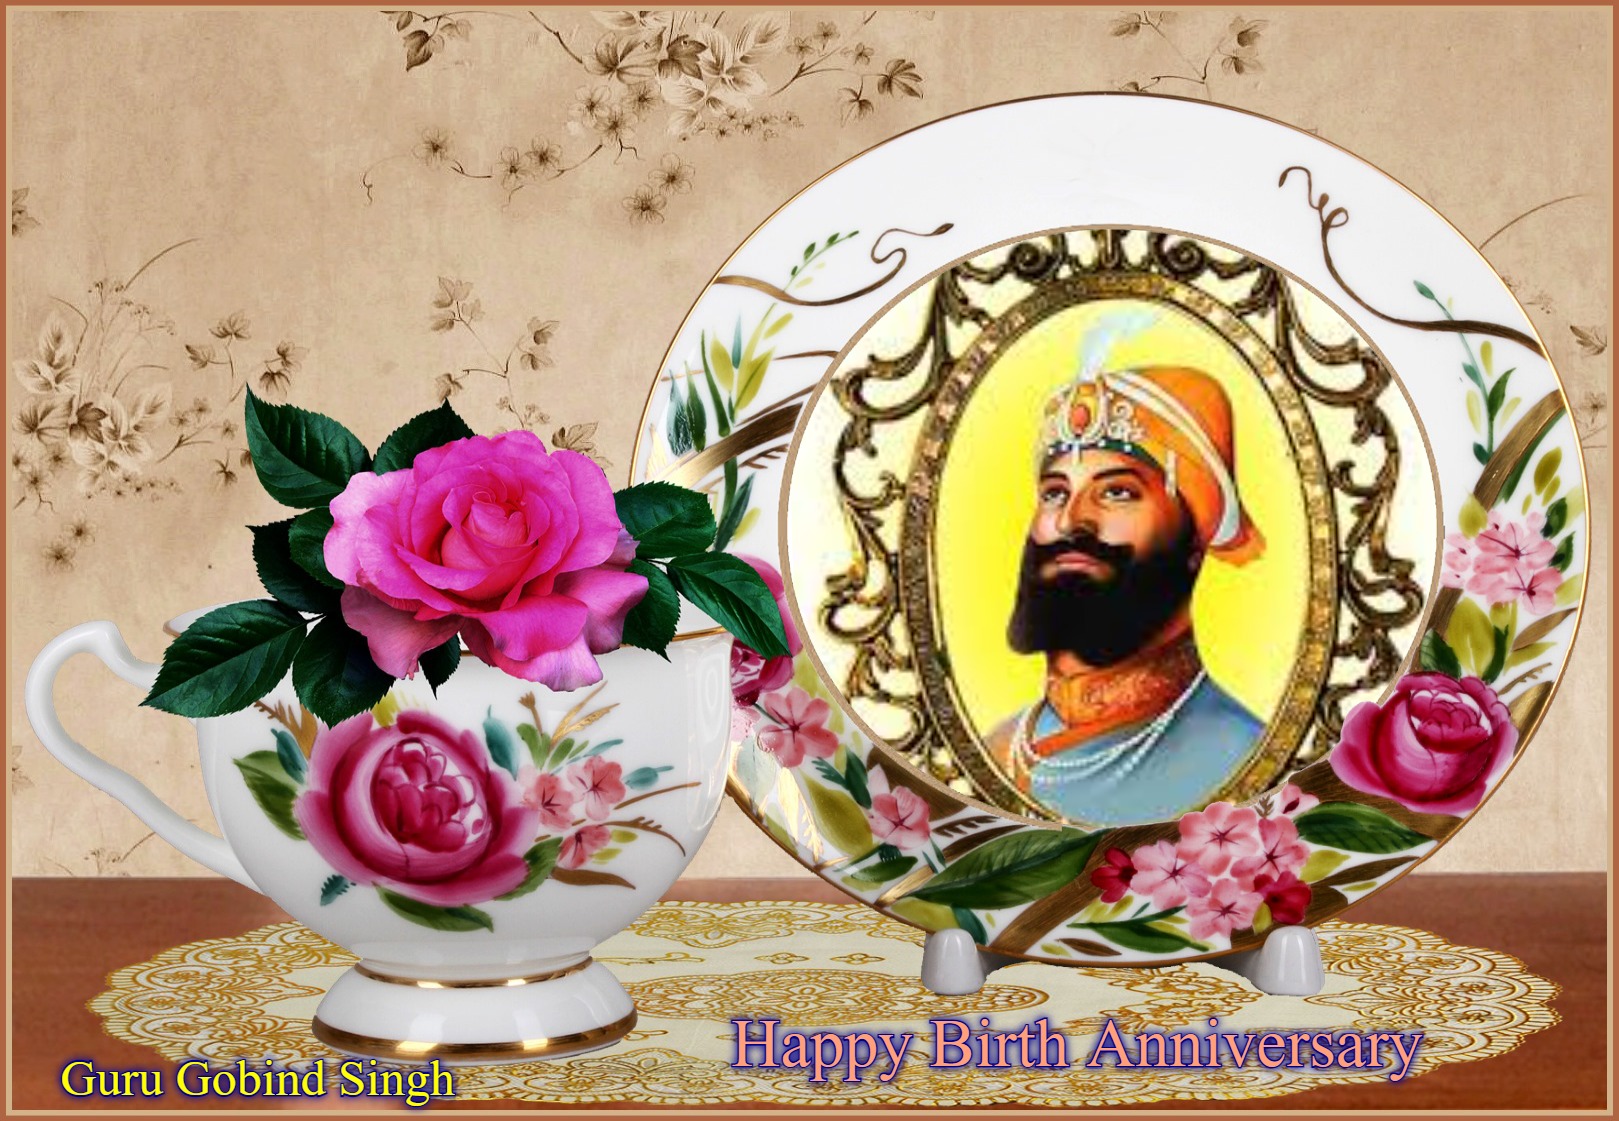 Read more about the article “Guru Gobind Singh- Saint, Scholar & A Man of Valor”